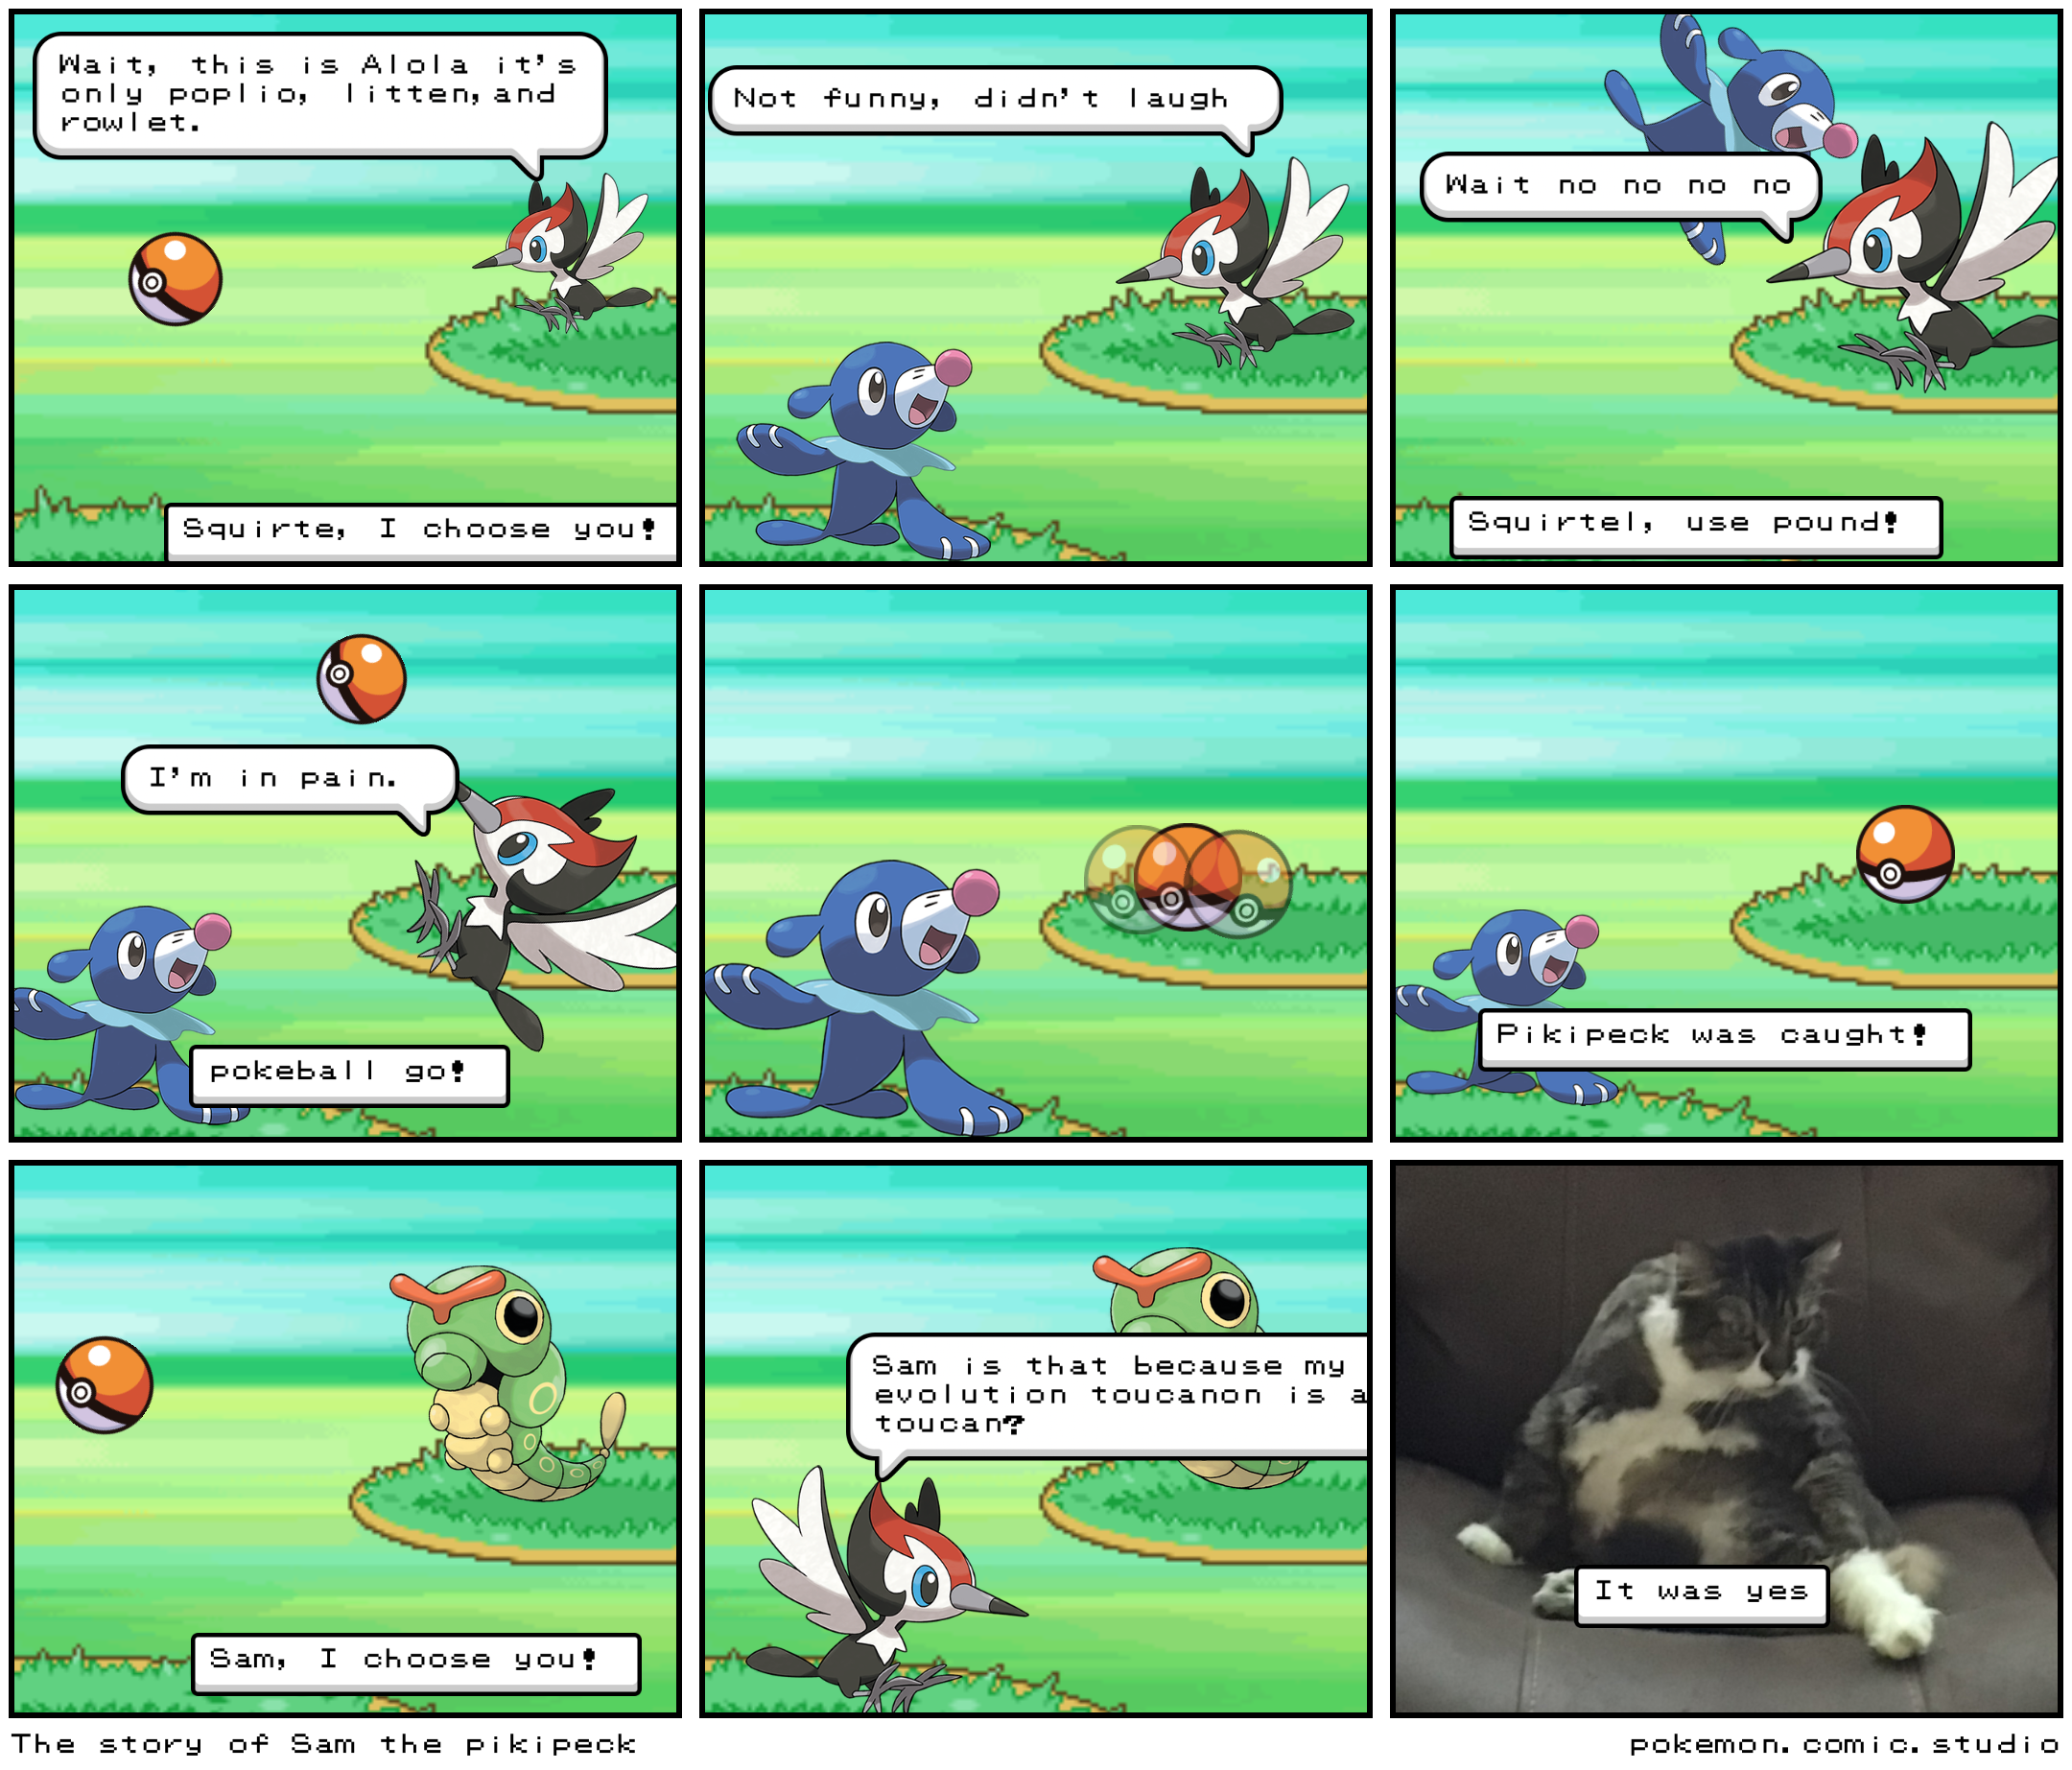 The story of Sam the pikipeck